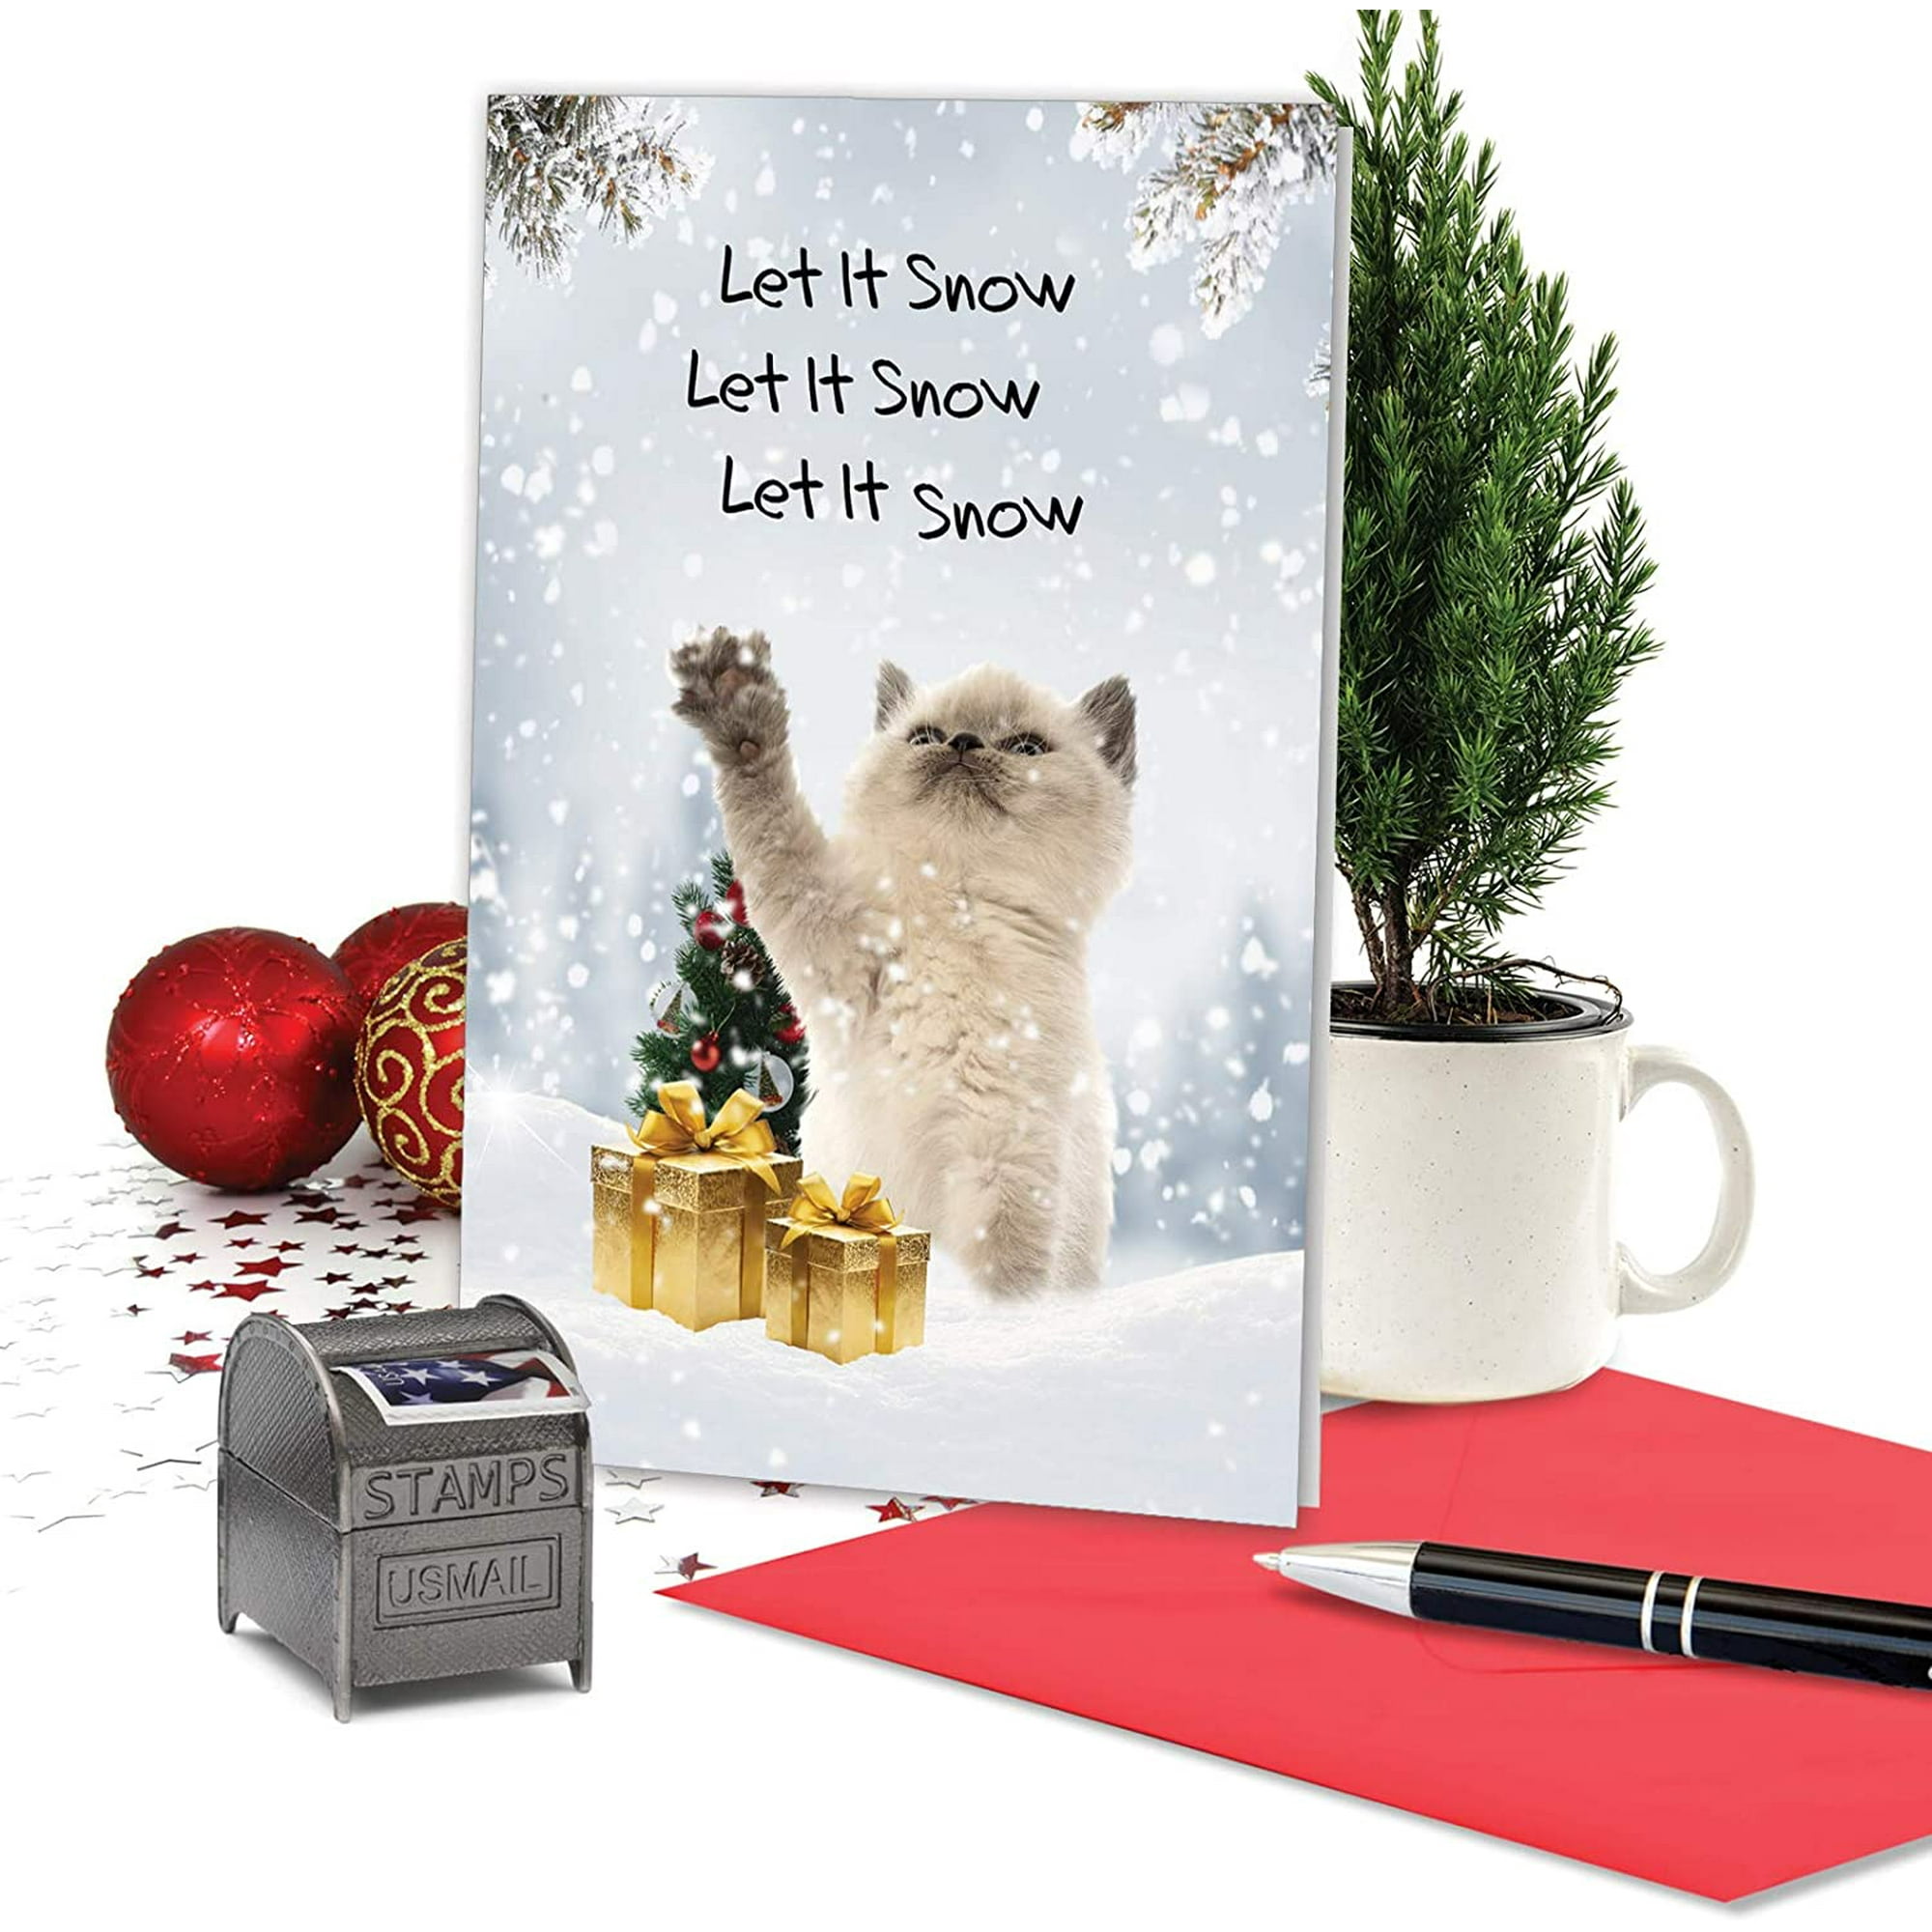 Funny Cat Card for Christmas - Xmas Holiday Greeting, Pet Cats Notecard  with Envelope - Cat Snow Celebration C3381XSG | Walmart Canada